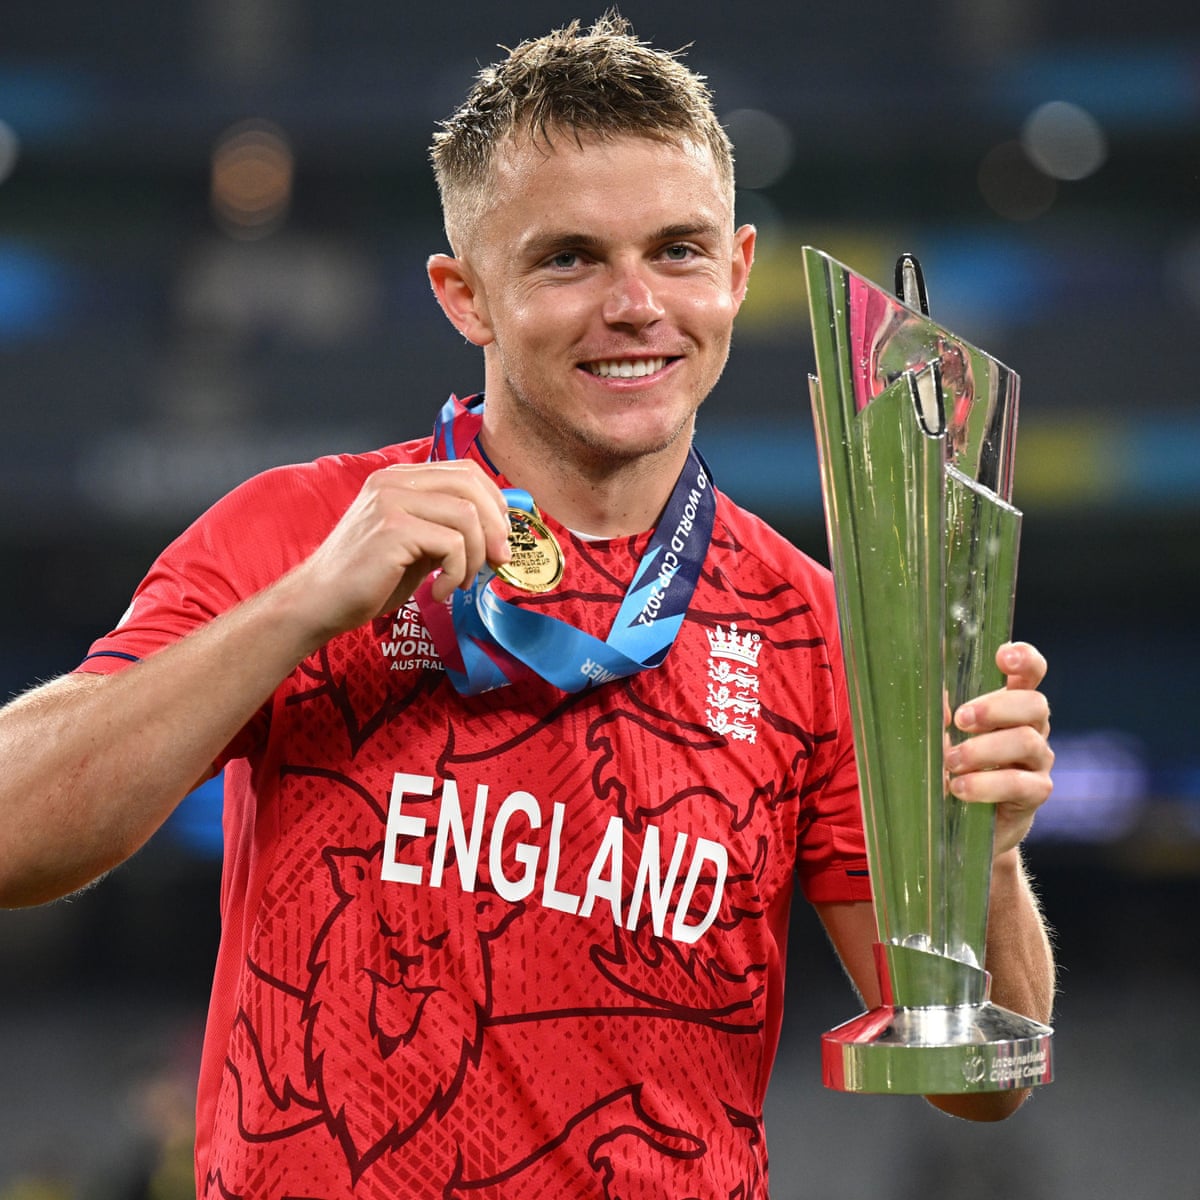 Sam Curran becomes most expensive player in IPL history